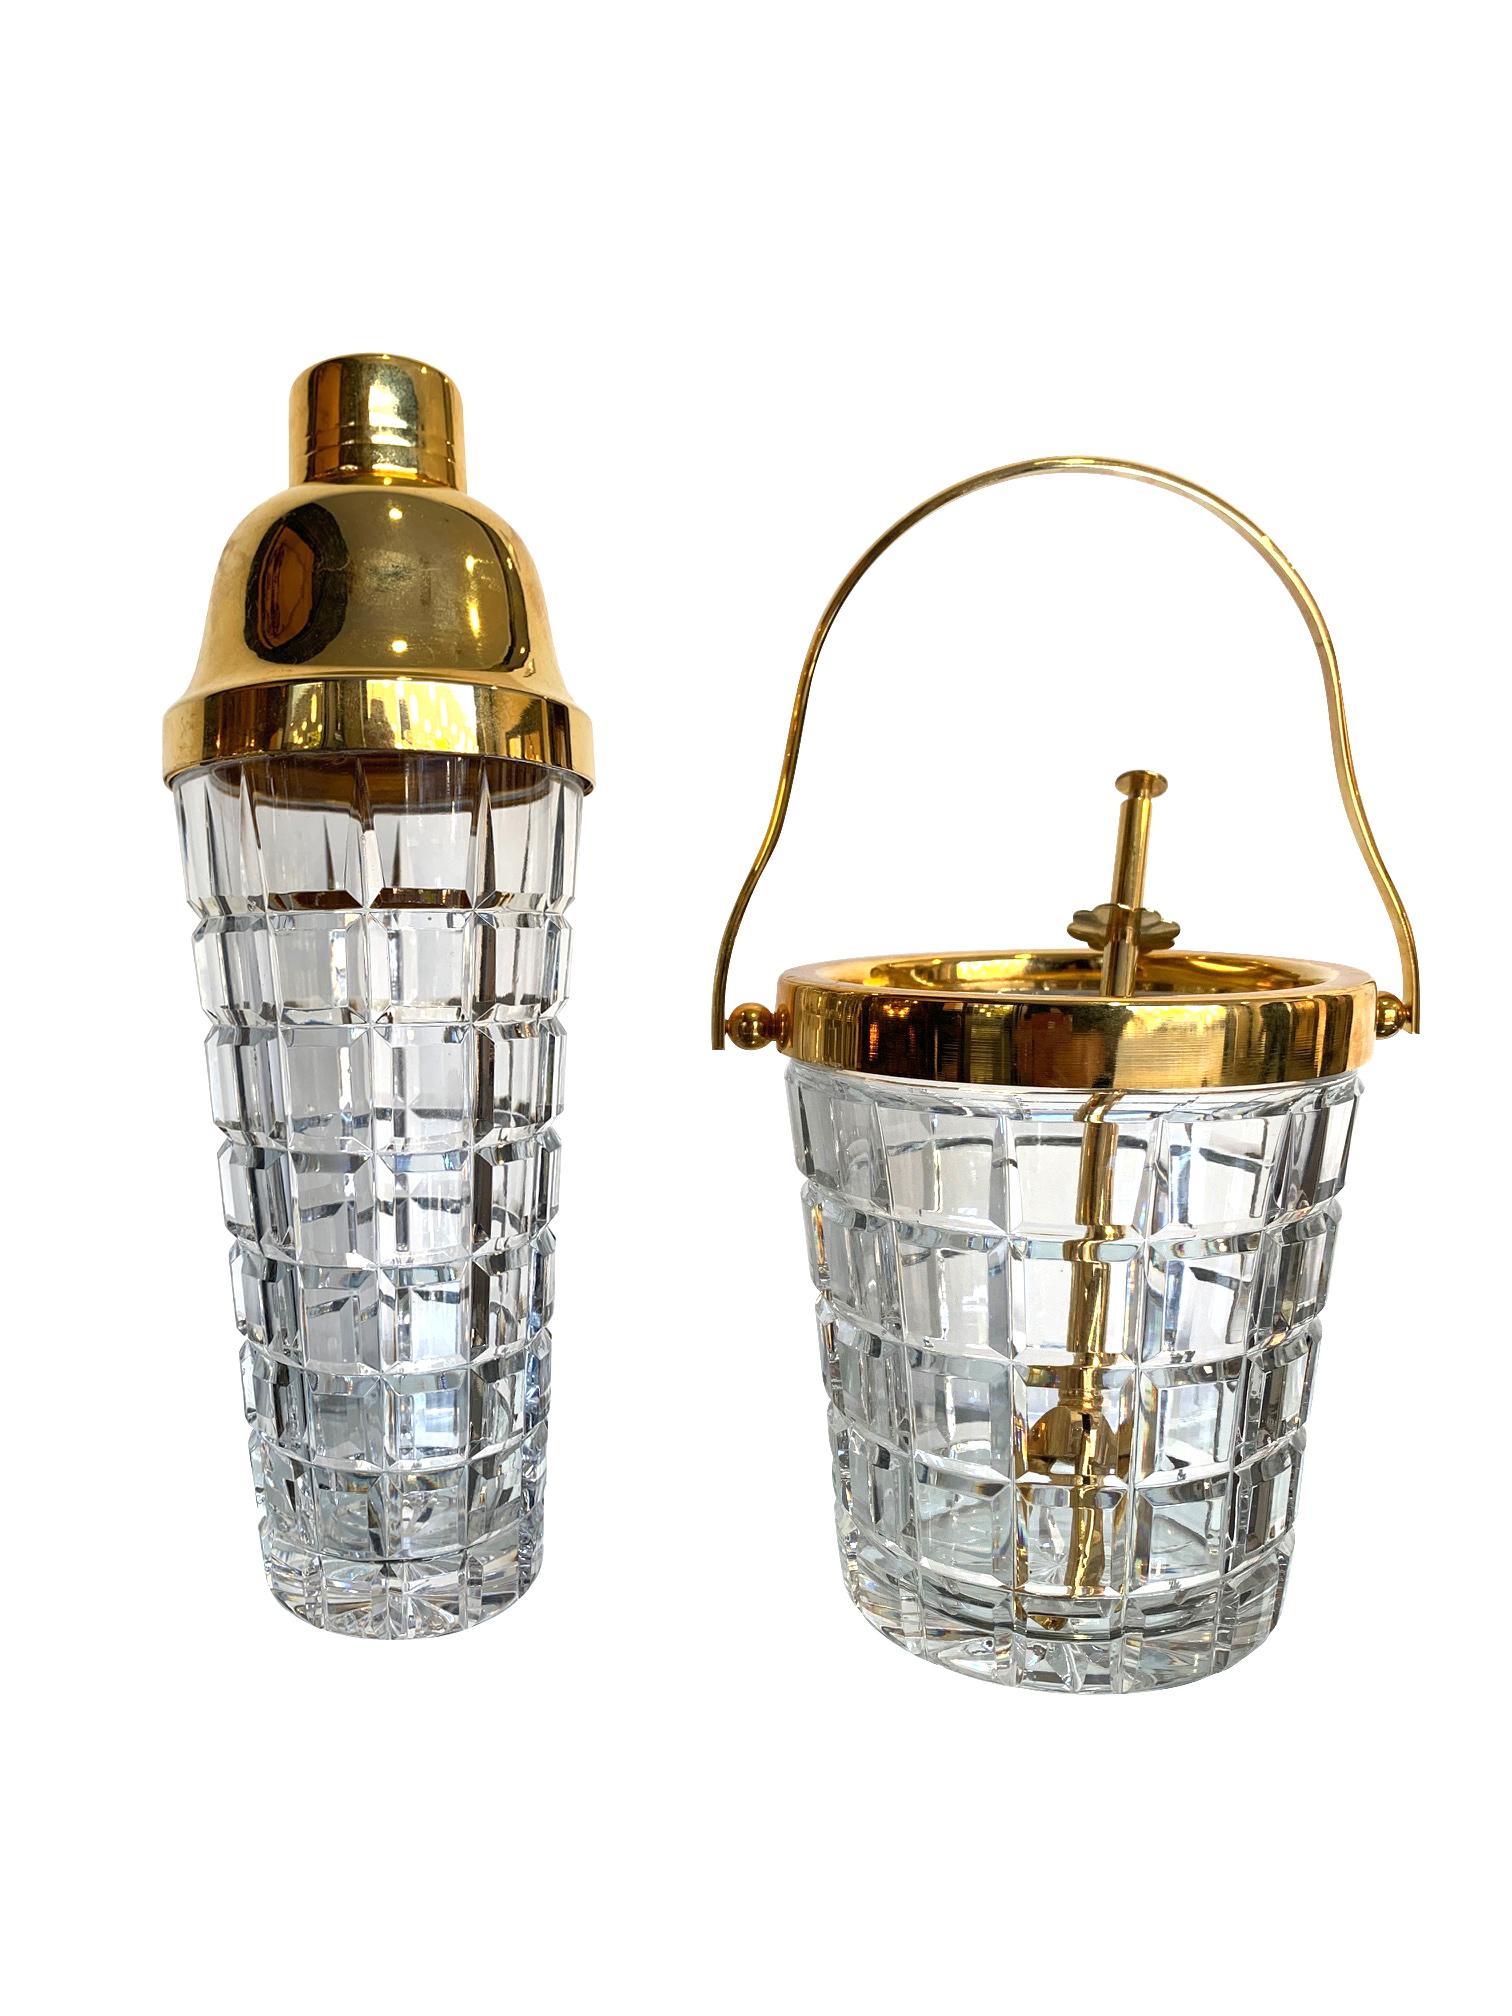 A stunning Val St Lambert crystal cocktail shaker and matching ice bucket with faceted block crystal design and gold plated rims and lid, with a set of gold plated ice grabbers for the ice bucket.